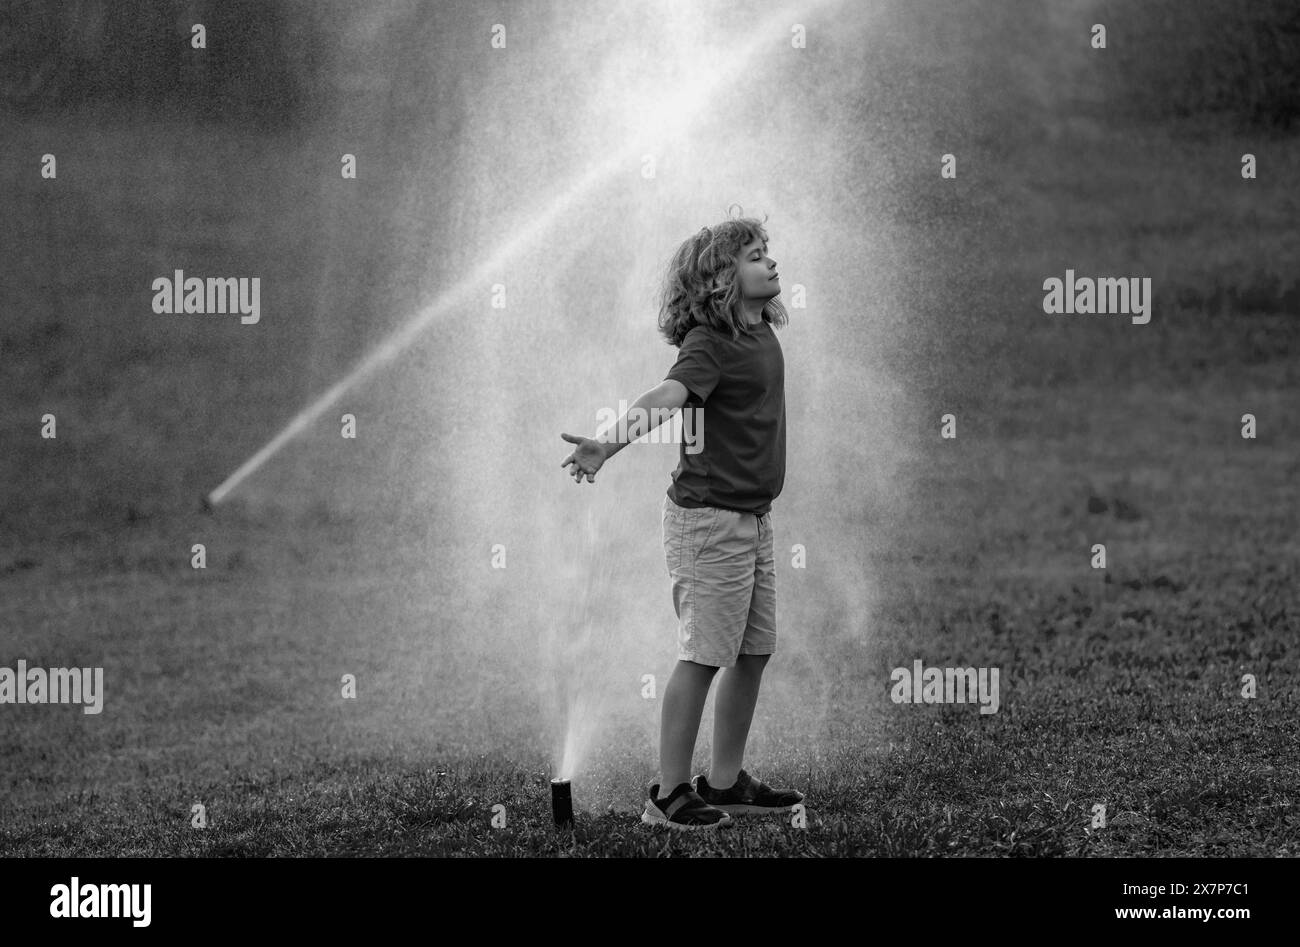 Child play in summer garden. Grass watering. Automatic sprinkler irrigation system in a green park watering lawn. Sprinkler watering. Child gardening Stock Photo